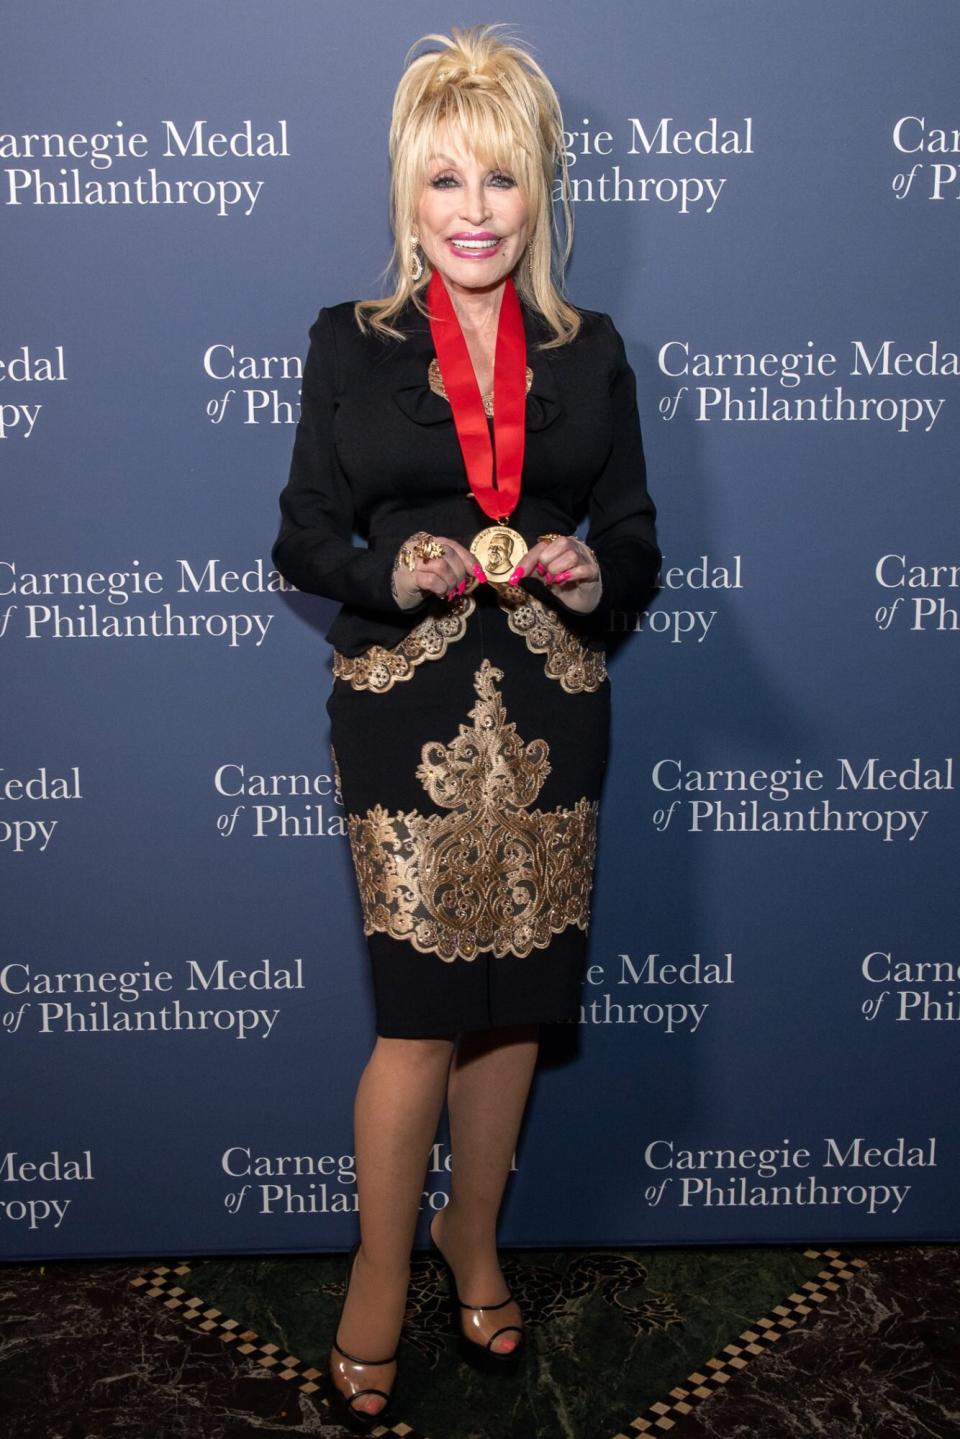 Dolly Parton Says Her Charity Work Isn't for 'a Tax Write-Off': 'Something I Can Take Pride In'. (credit: Carnegie Medal of Philanthropy)..